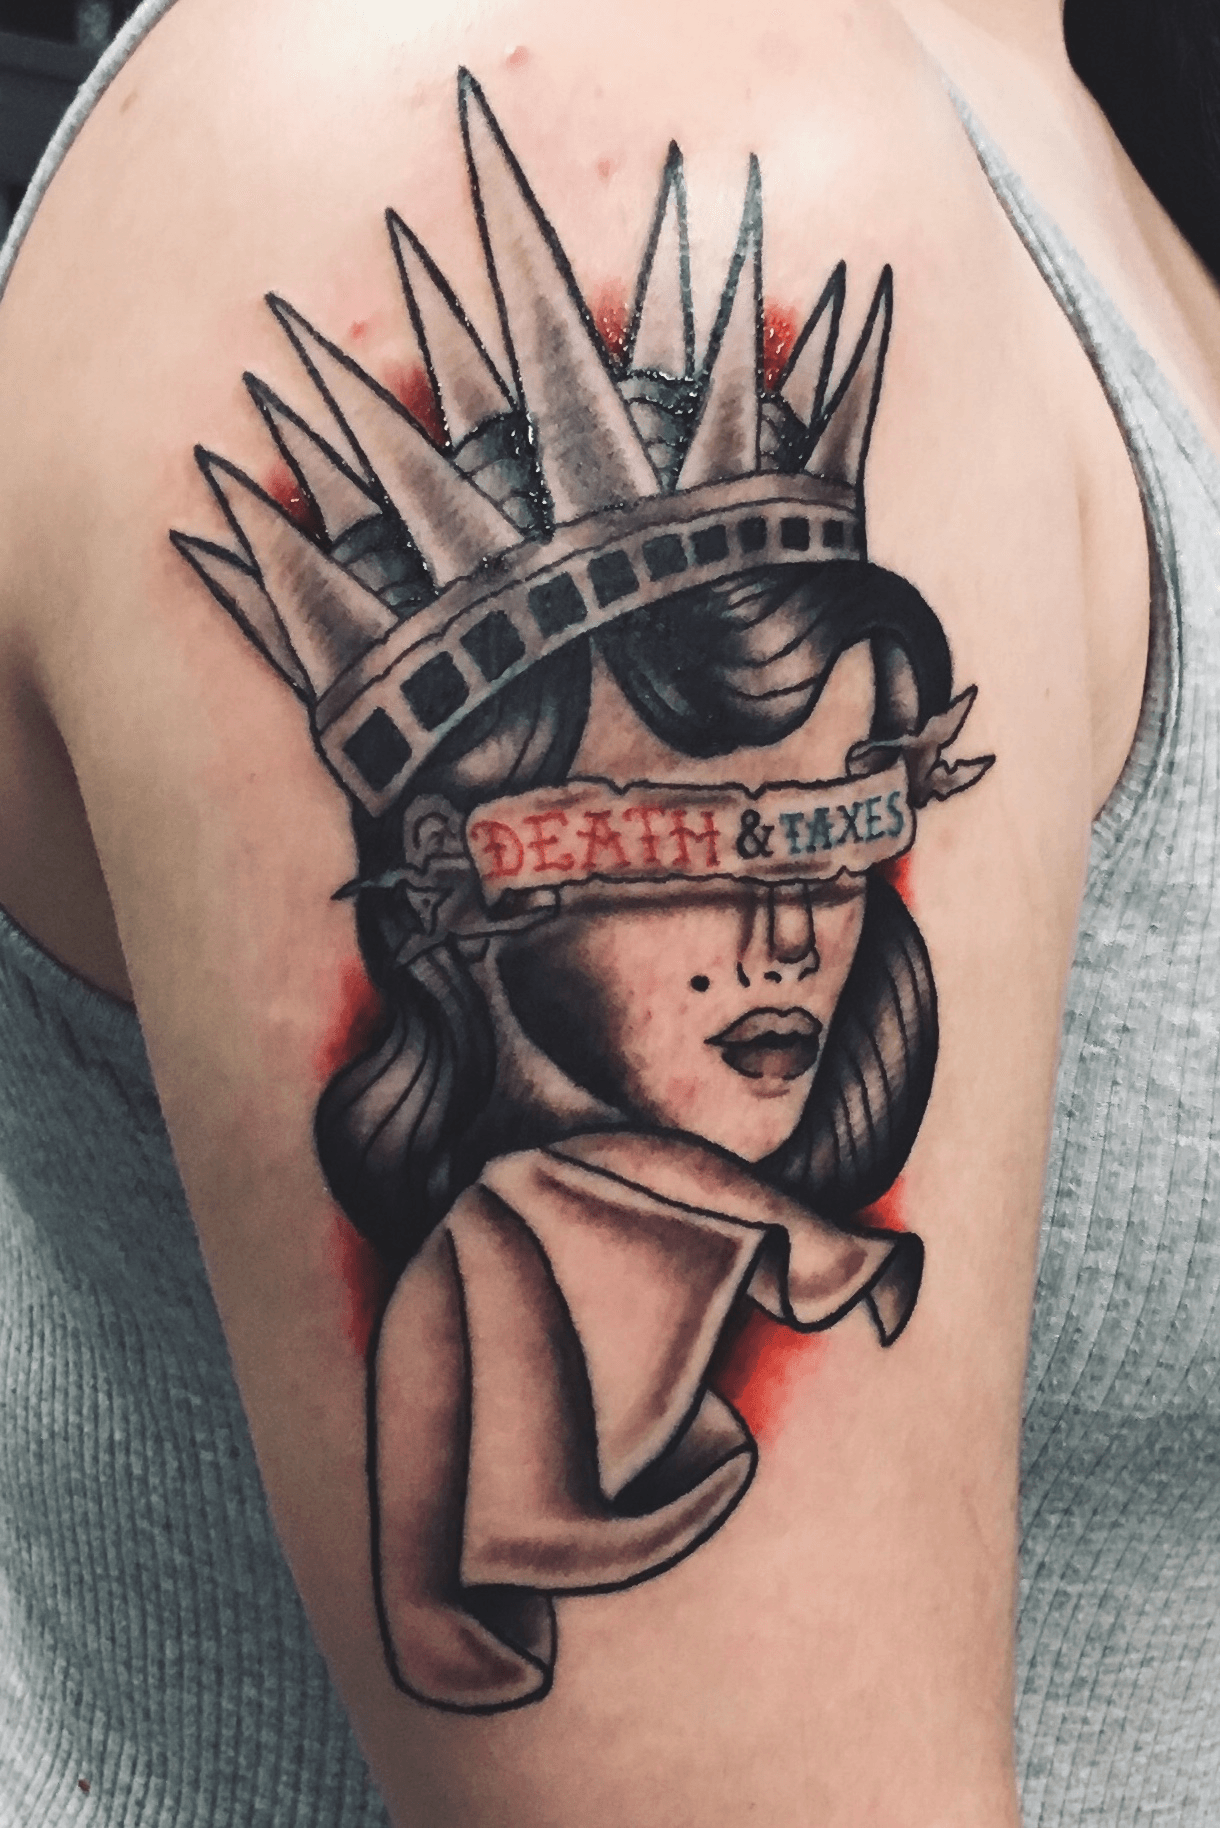 Latest Liberty or death Tattoos  Find Liberty or death Tattoos